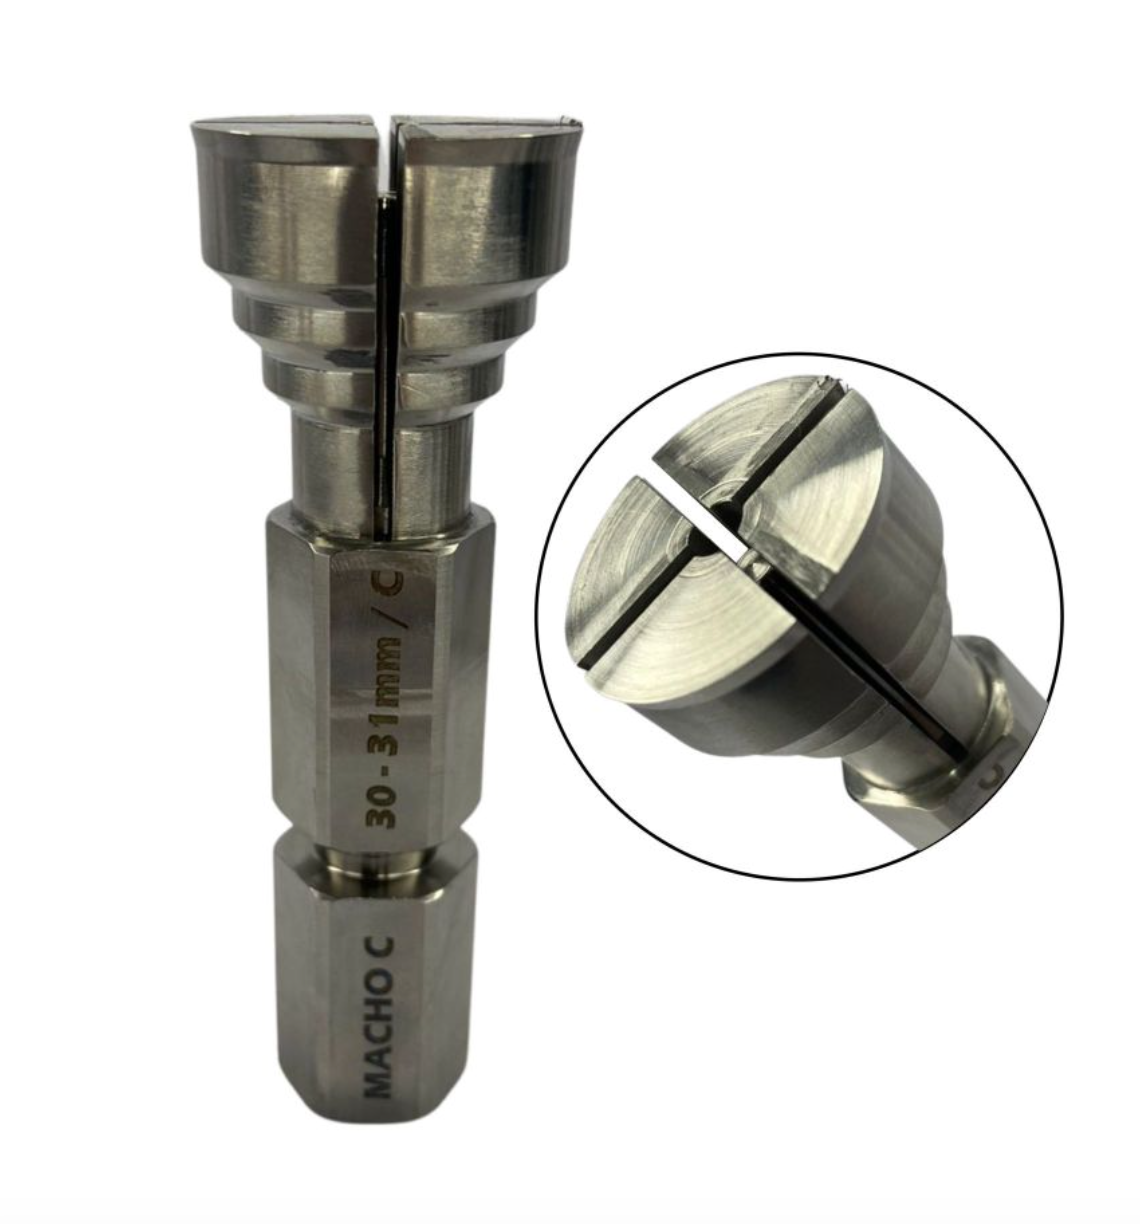 Bearing Extraction Tool (6mm to 30mm inner width bearings)